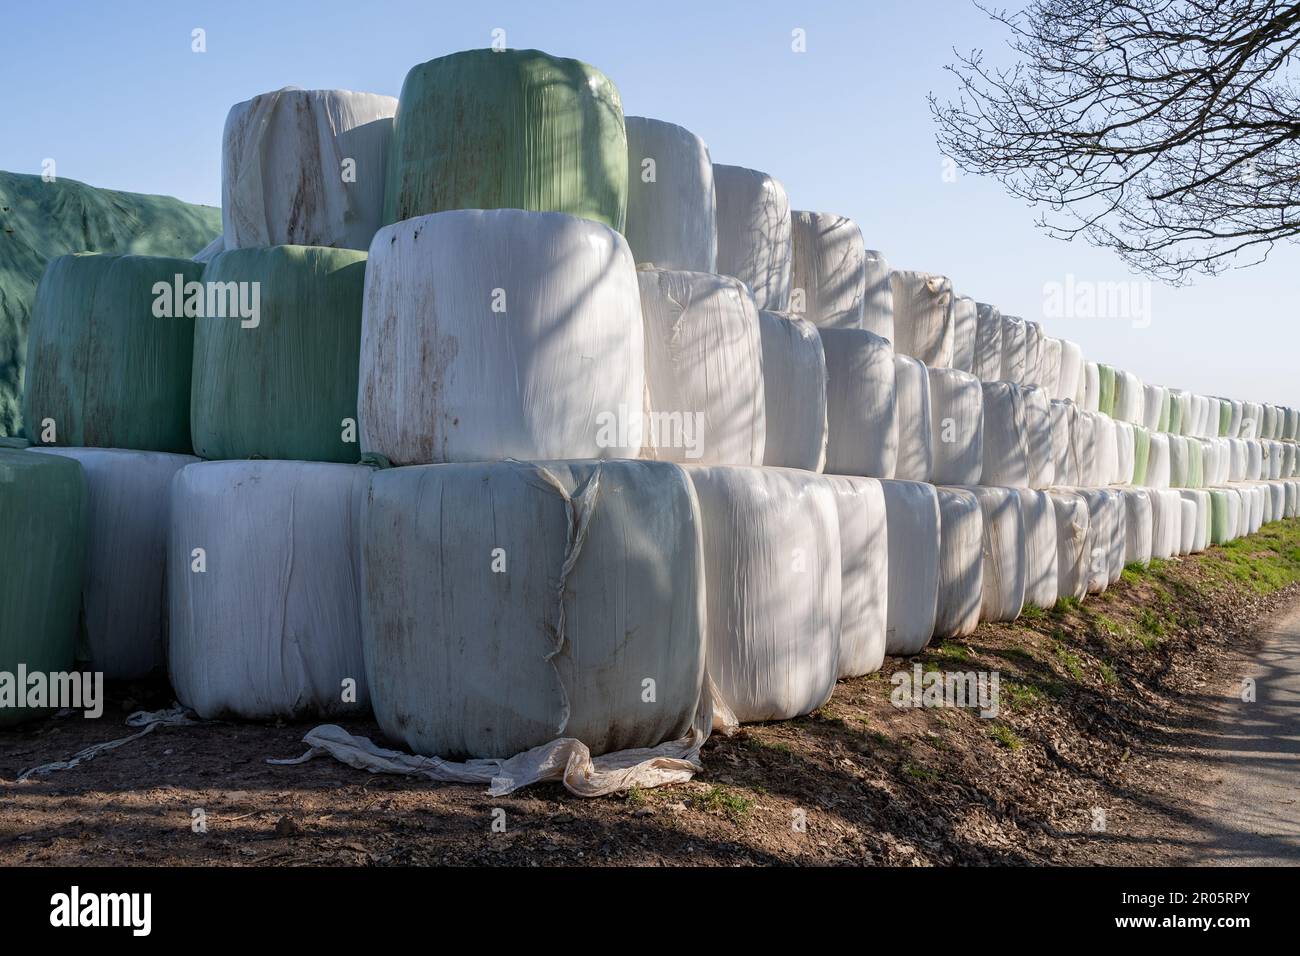 Many wraped and stacked hay bales on the side of a country road on a sunny day with blue sky in spring Stock Photo